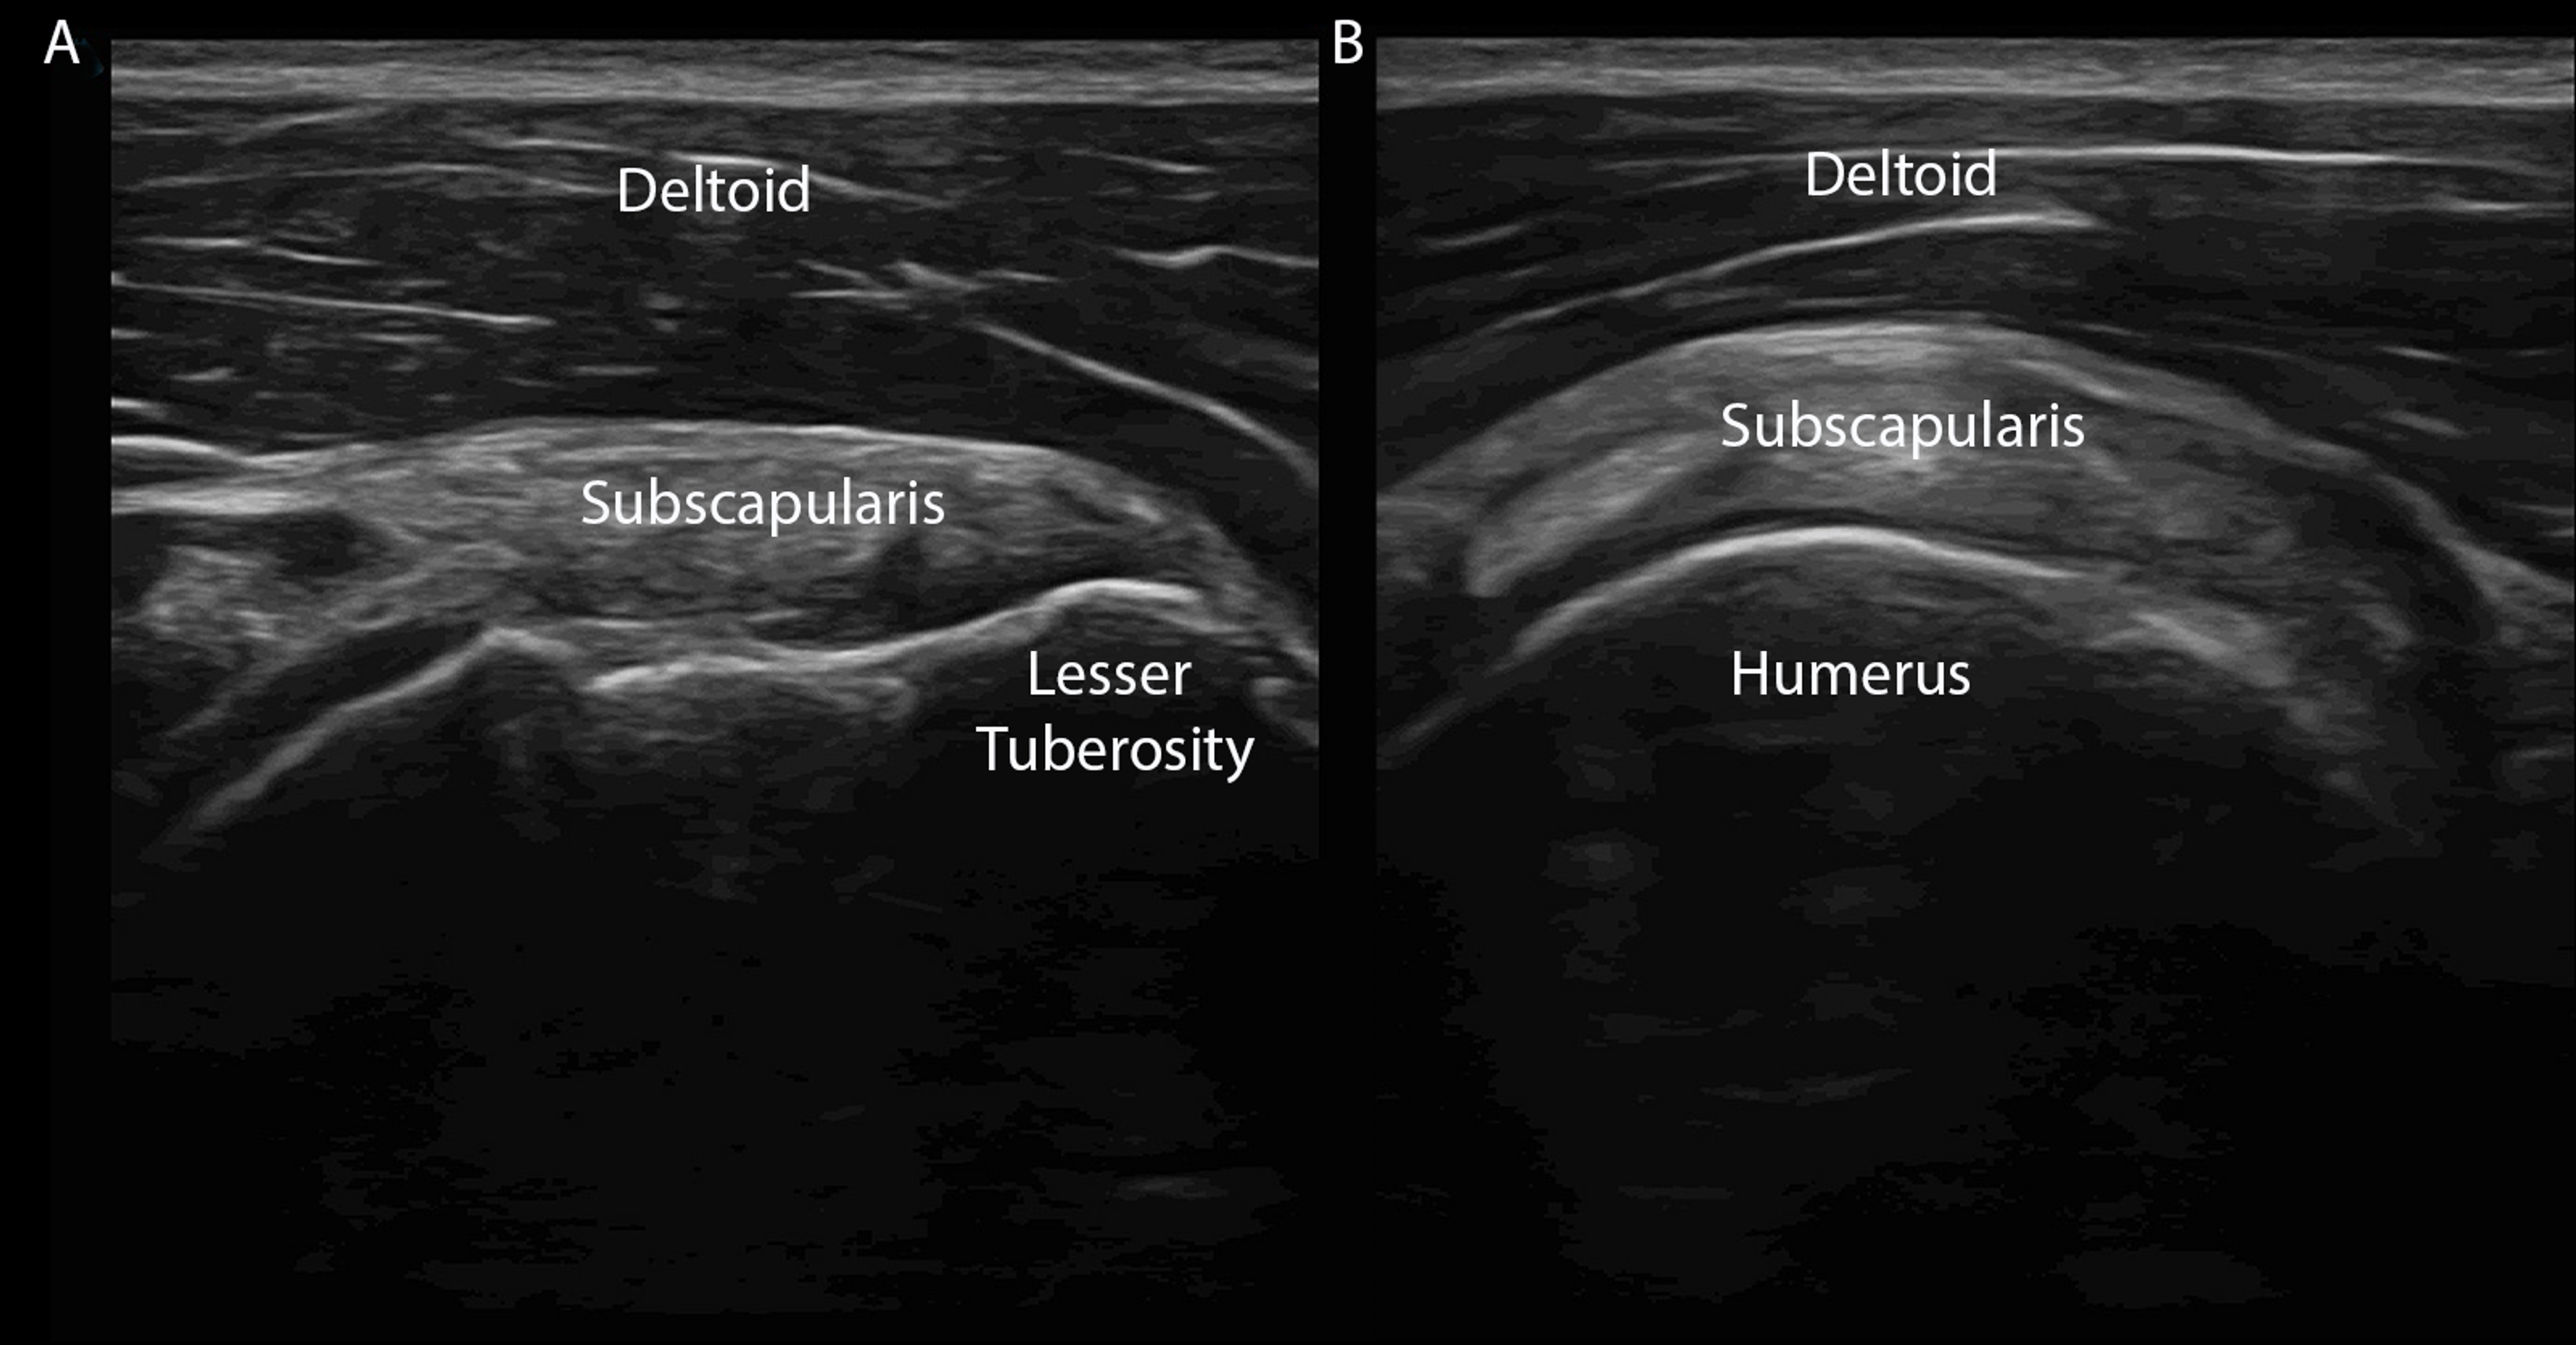 Pdf Ultrasound Of The Shoulder Joint For Impingement Syndrome The